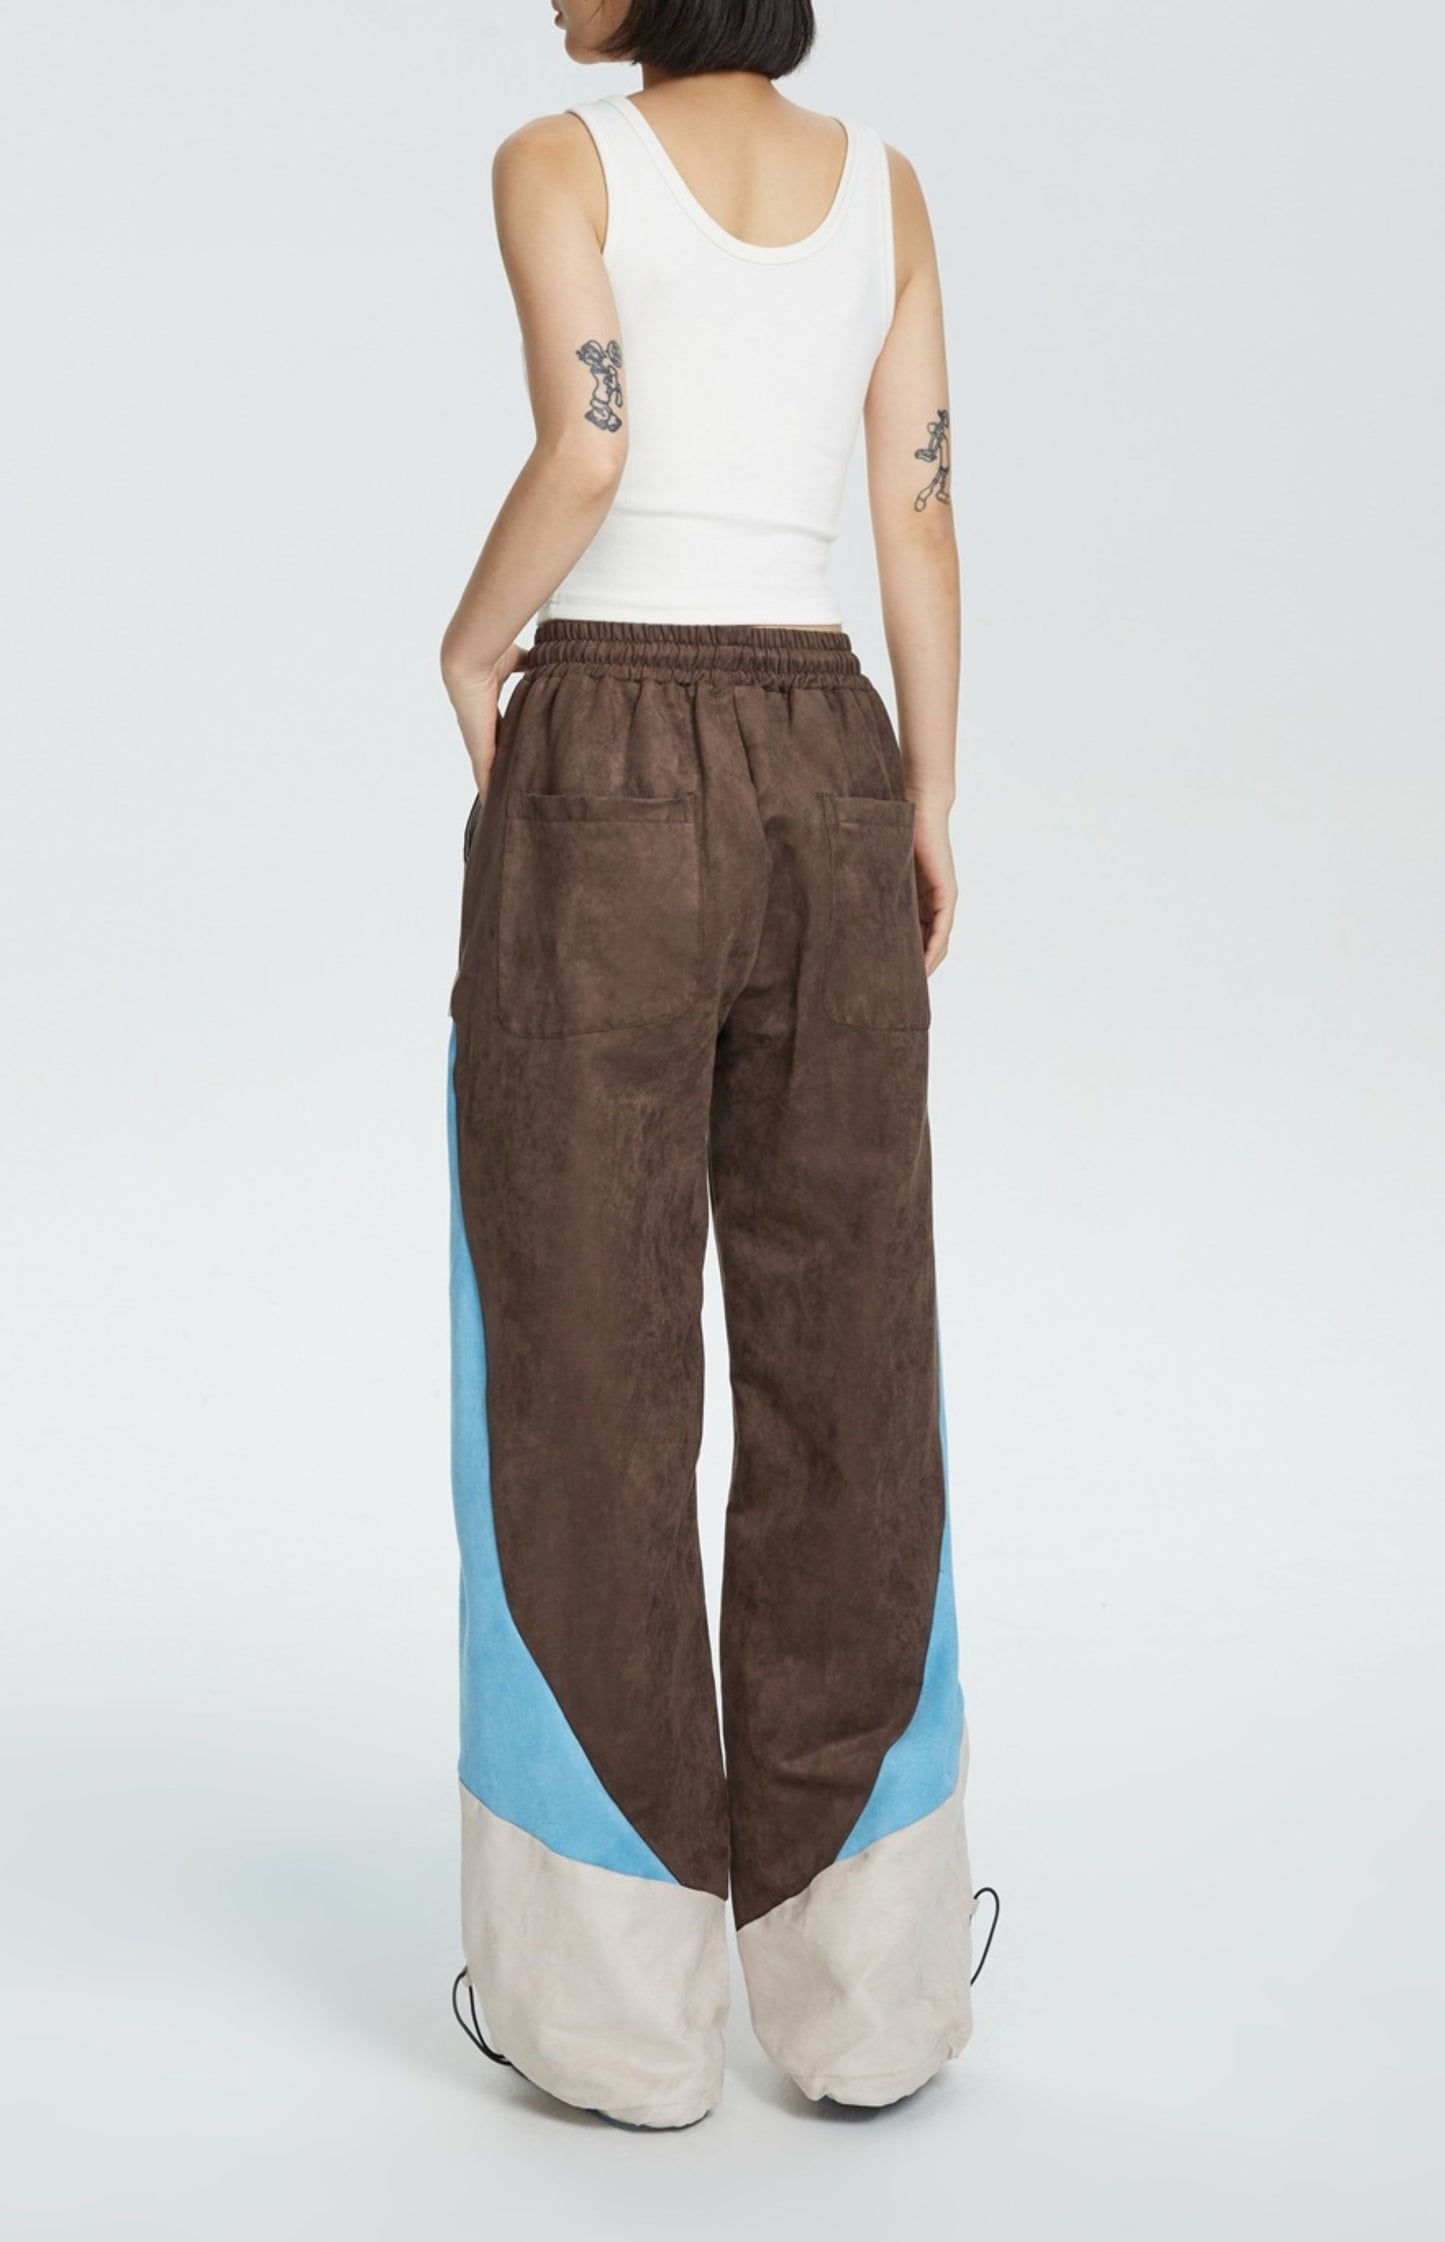 Retro Patchwork Contrasting Sports Casual Pants